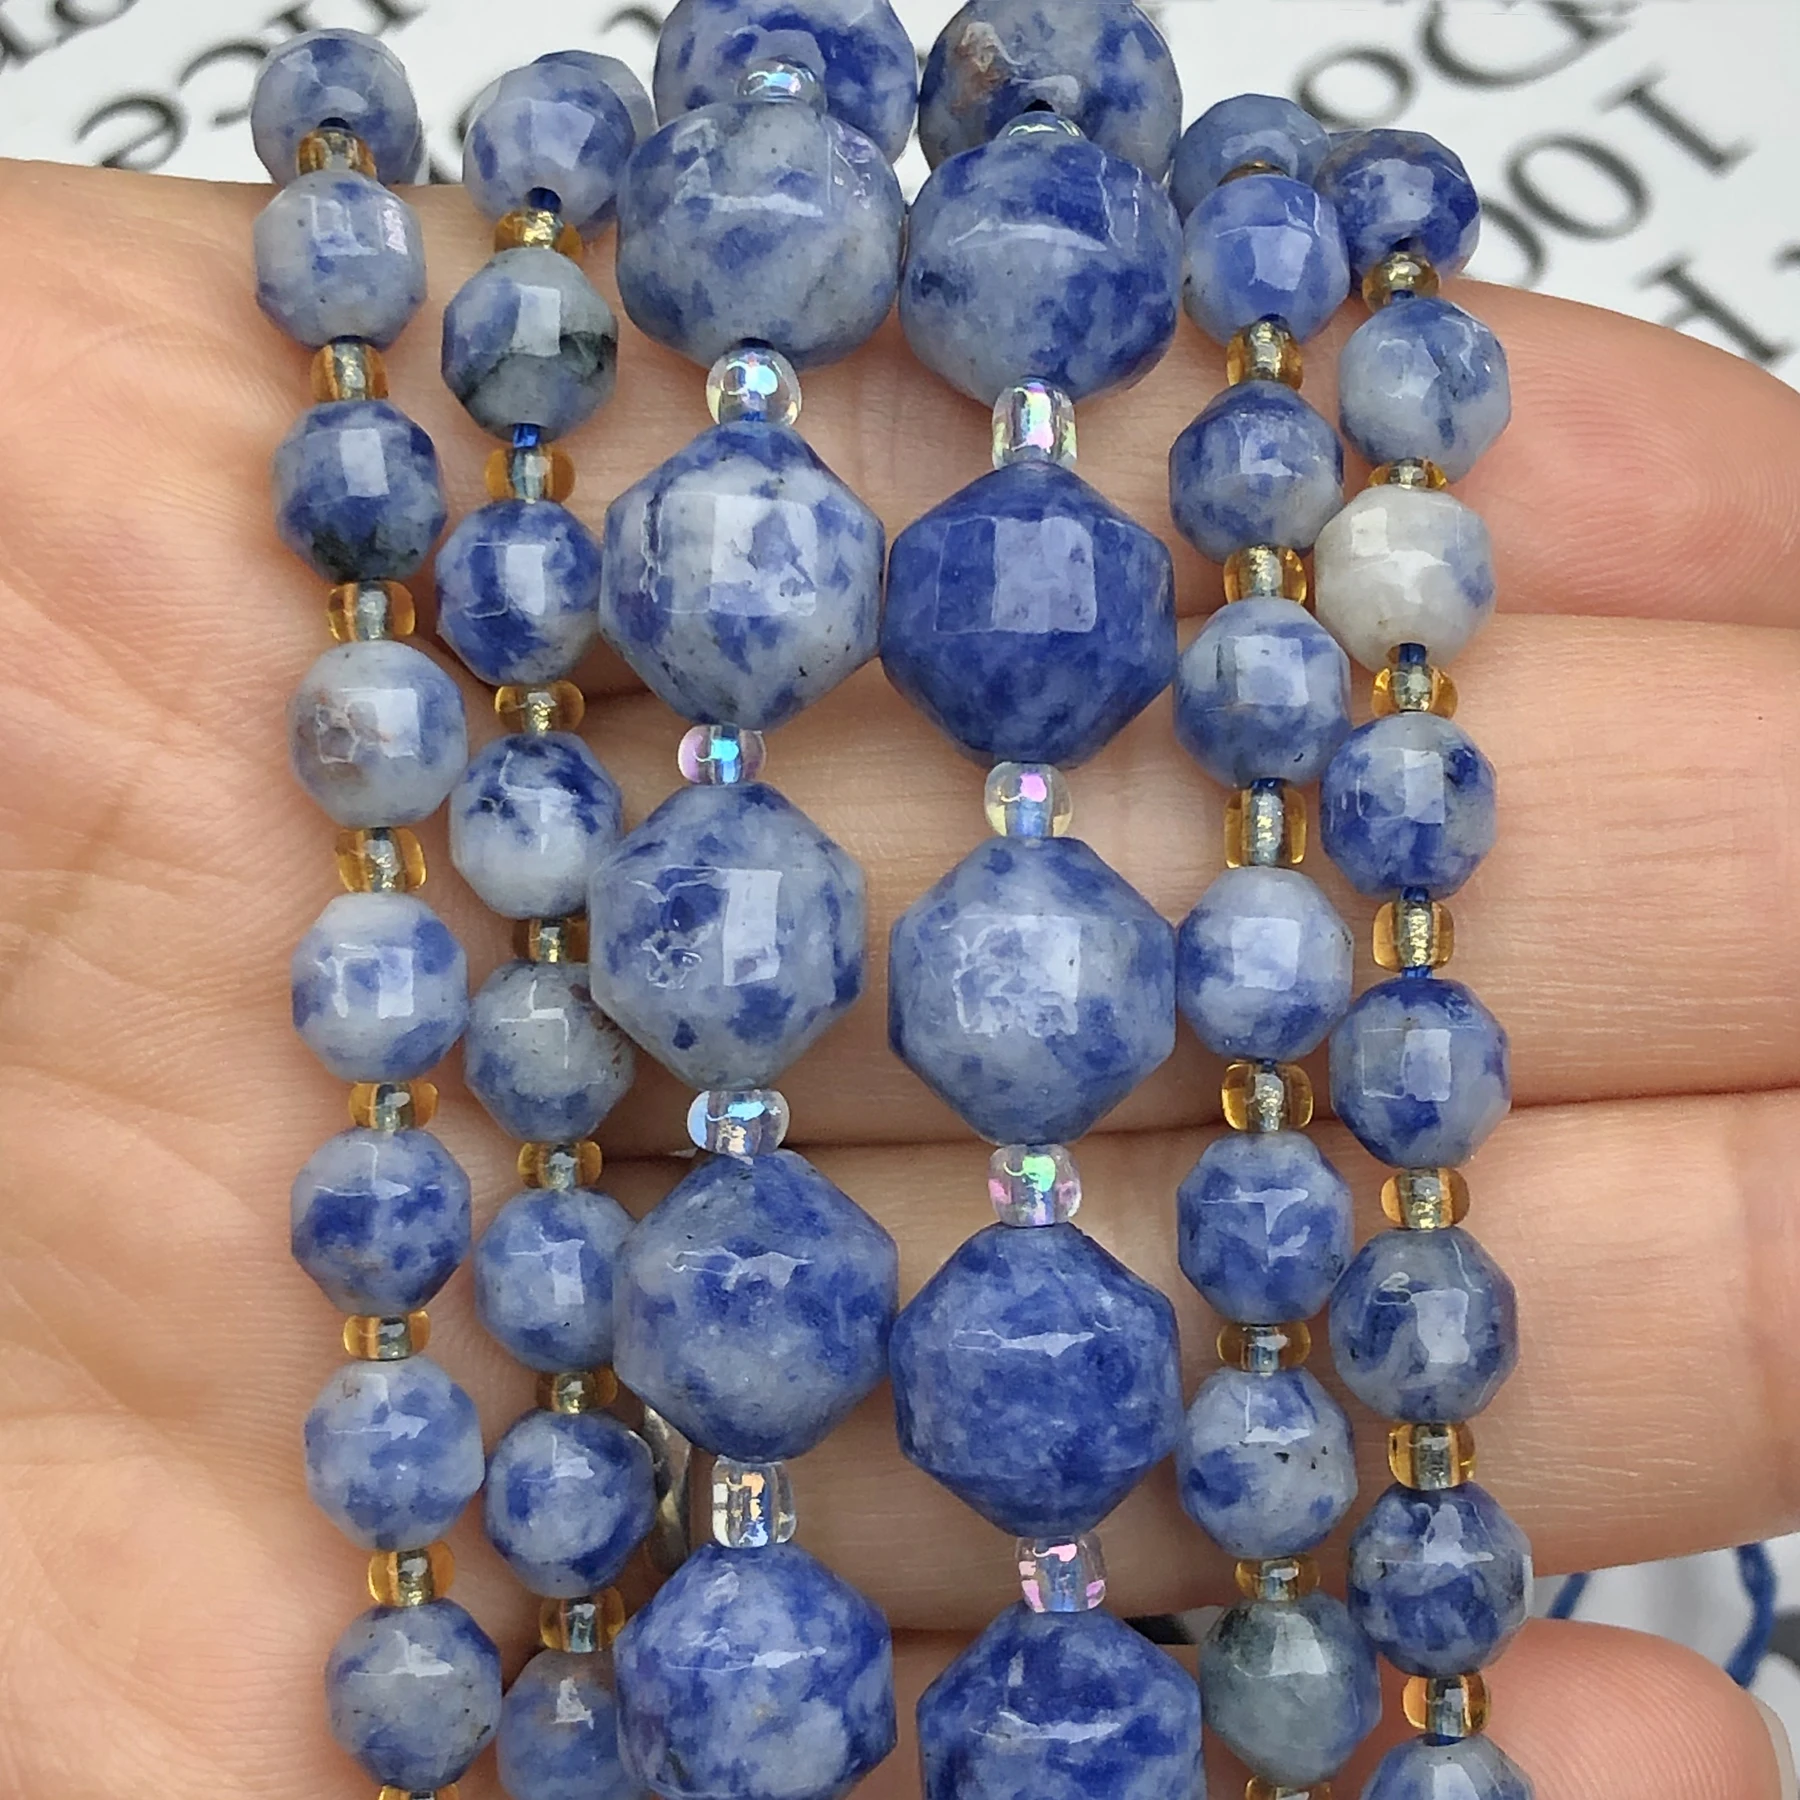 

Natural Stone Faceted New Blue Sodalite Jaspers Bead Loose Spacer Beads For Jewelry Making DIY Earrings Bracelet 6/8/10mm 15"